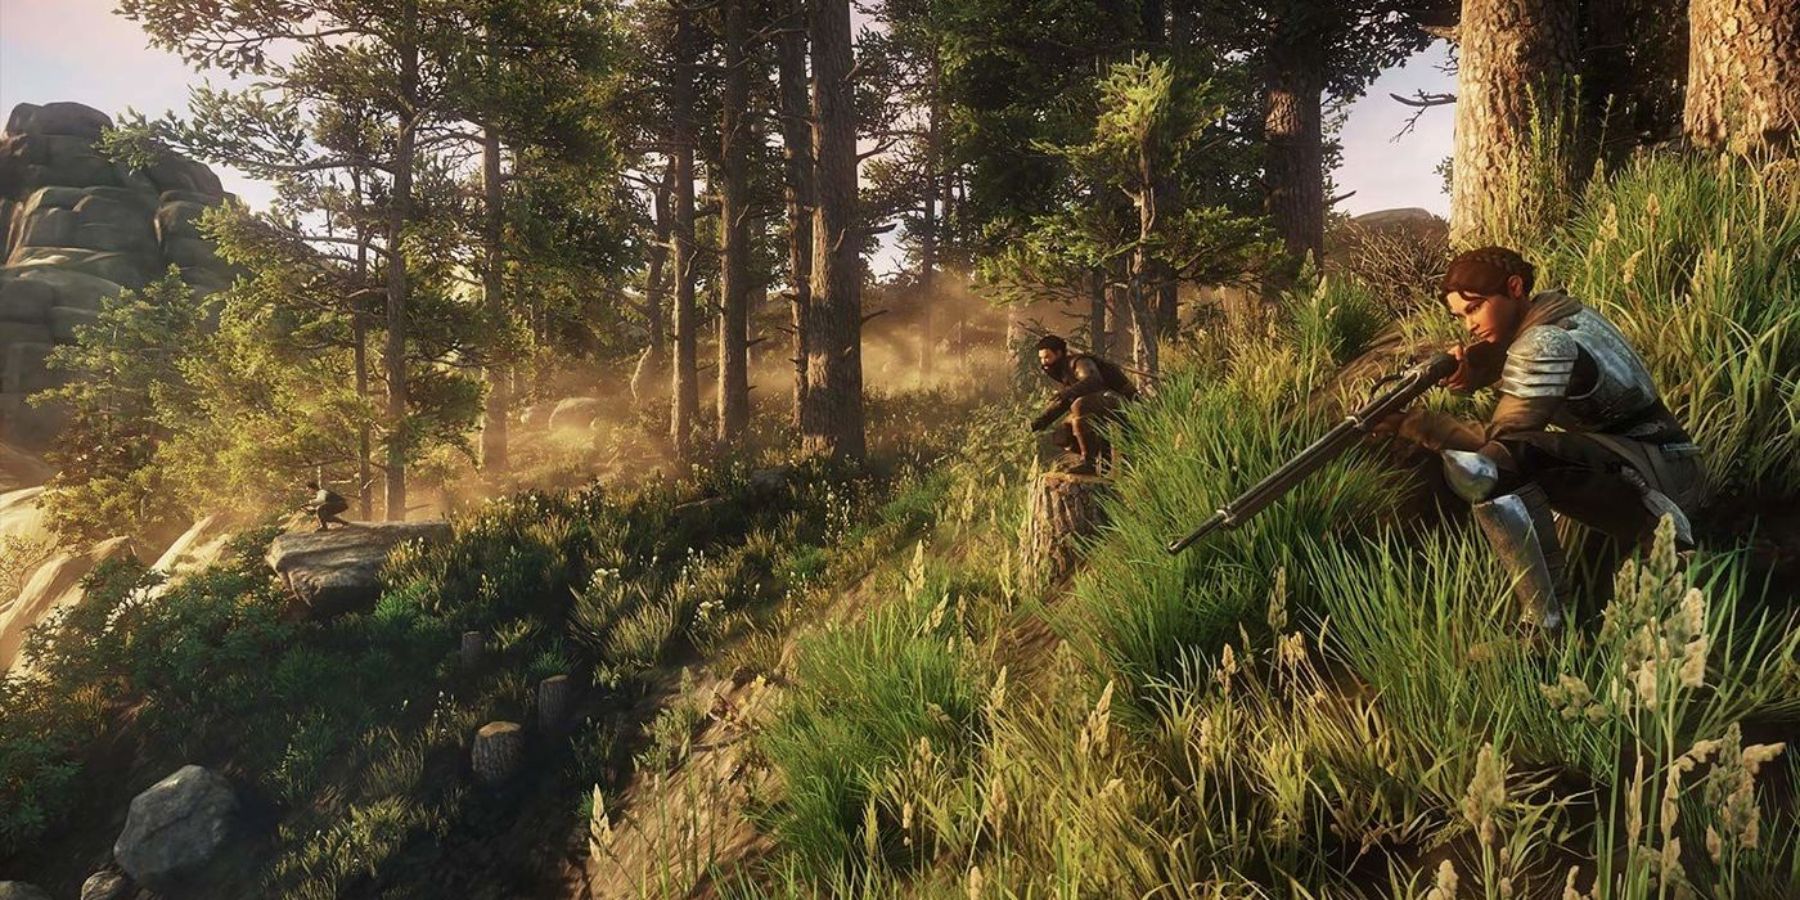 3 players crouching in the wilderness while holding rifles